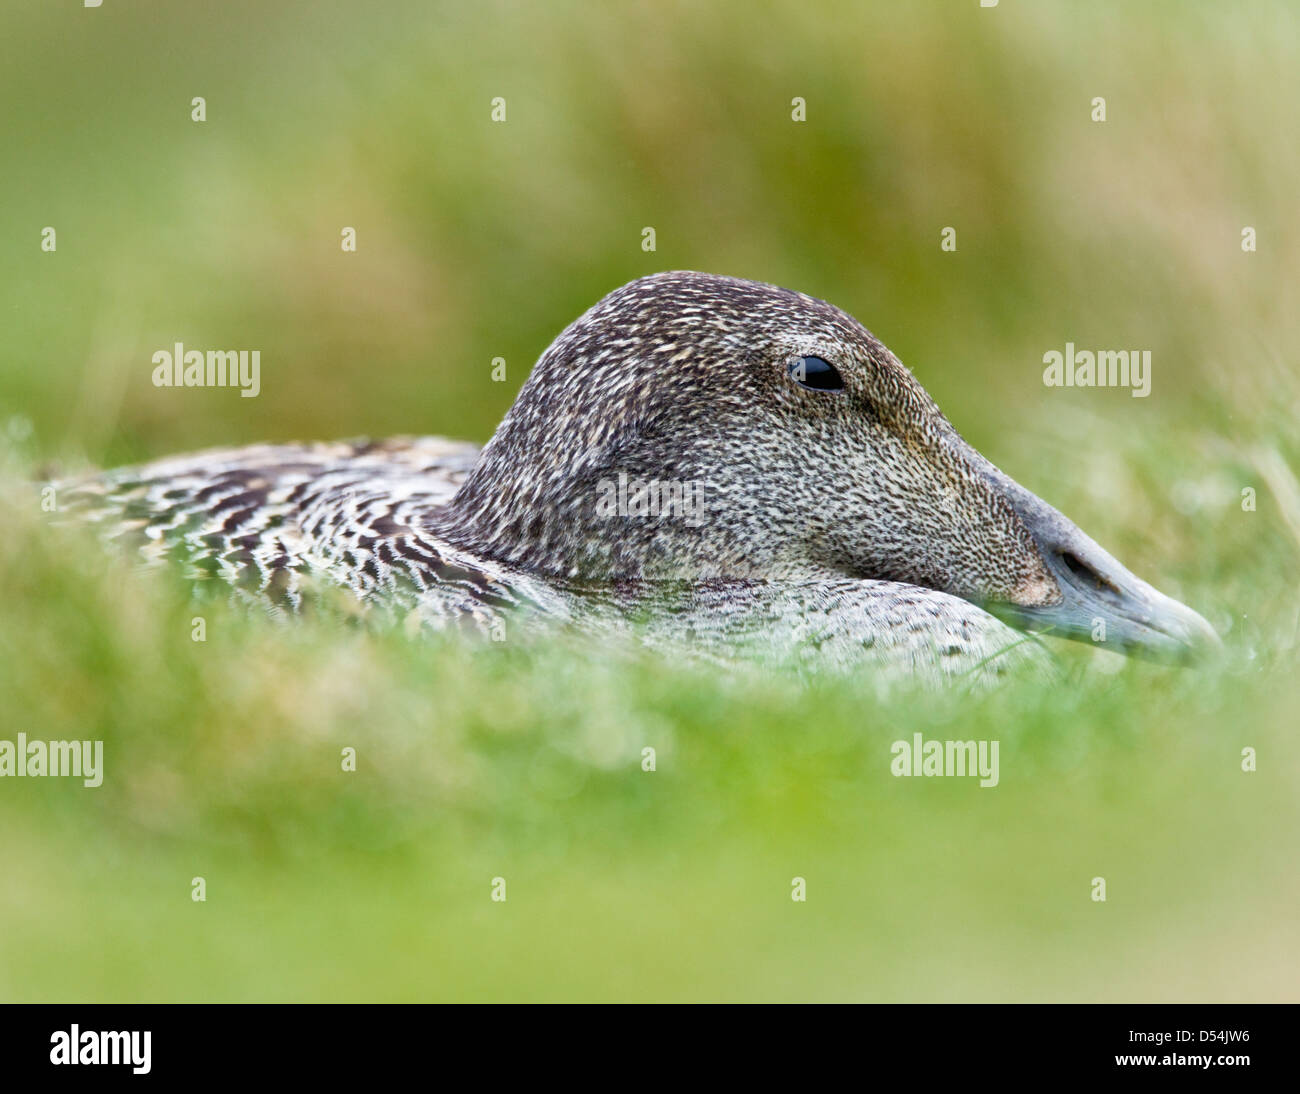 Somateria mollissima,Female Common Eider incubating her eggs on a bed of grass,profile view Stock Photo